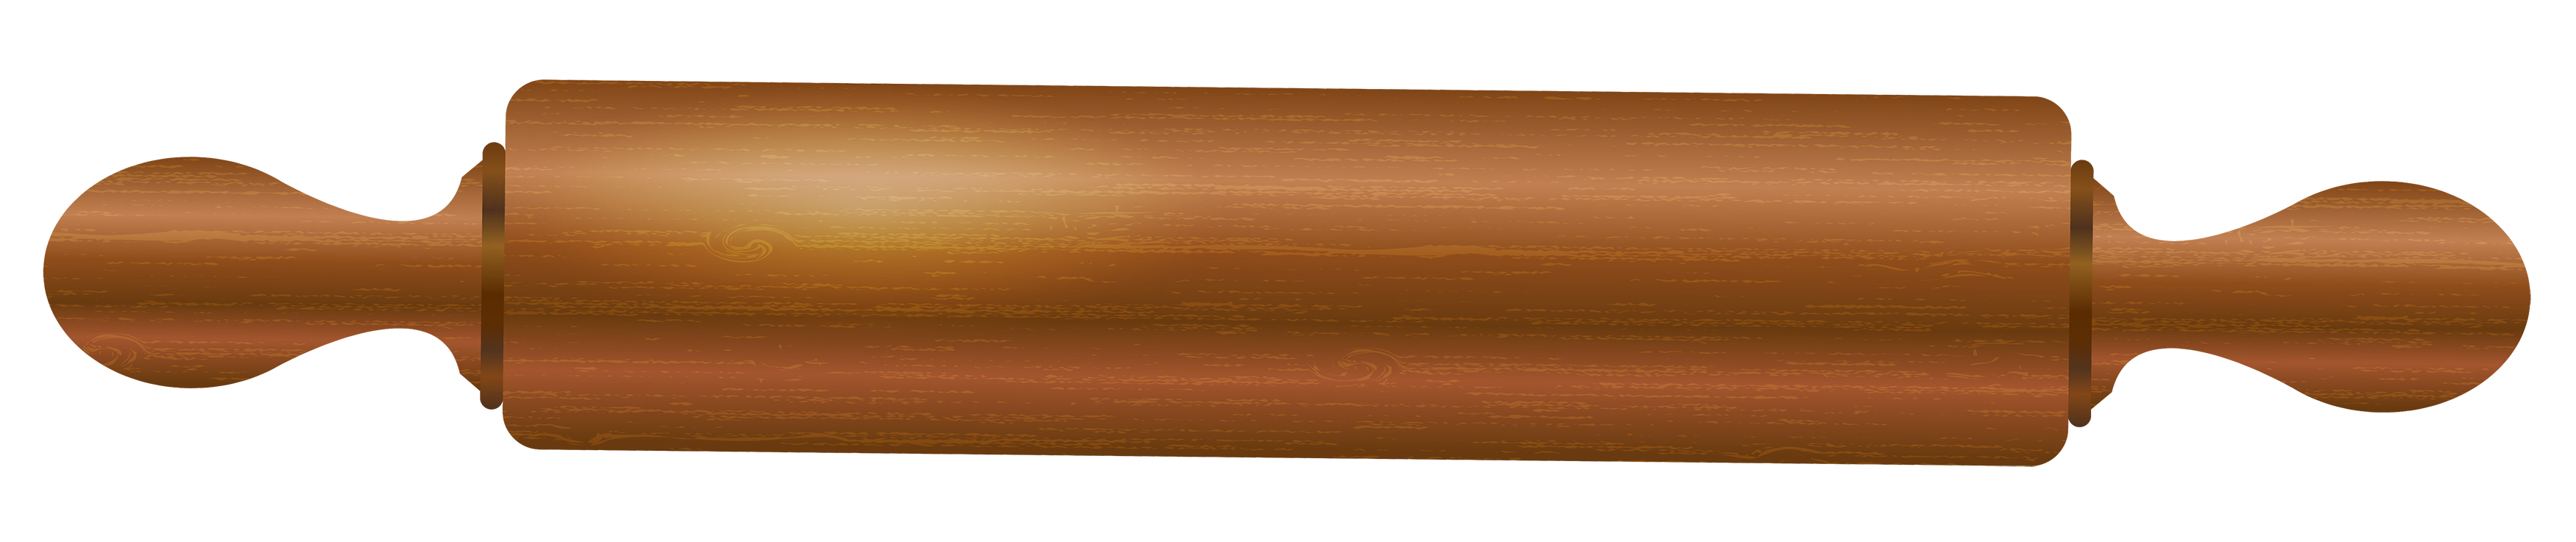 rolling pin png